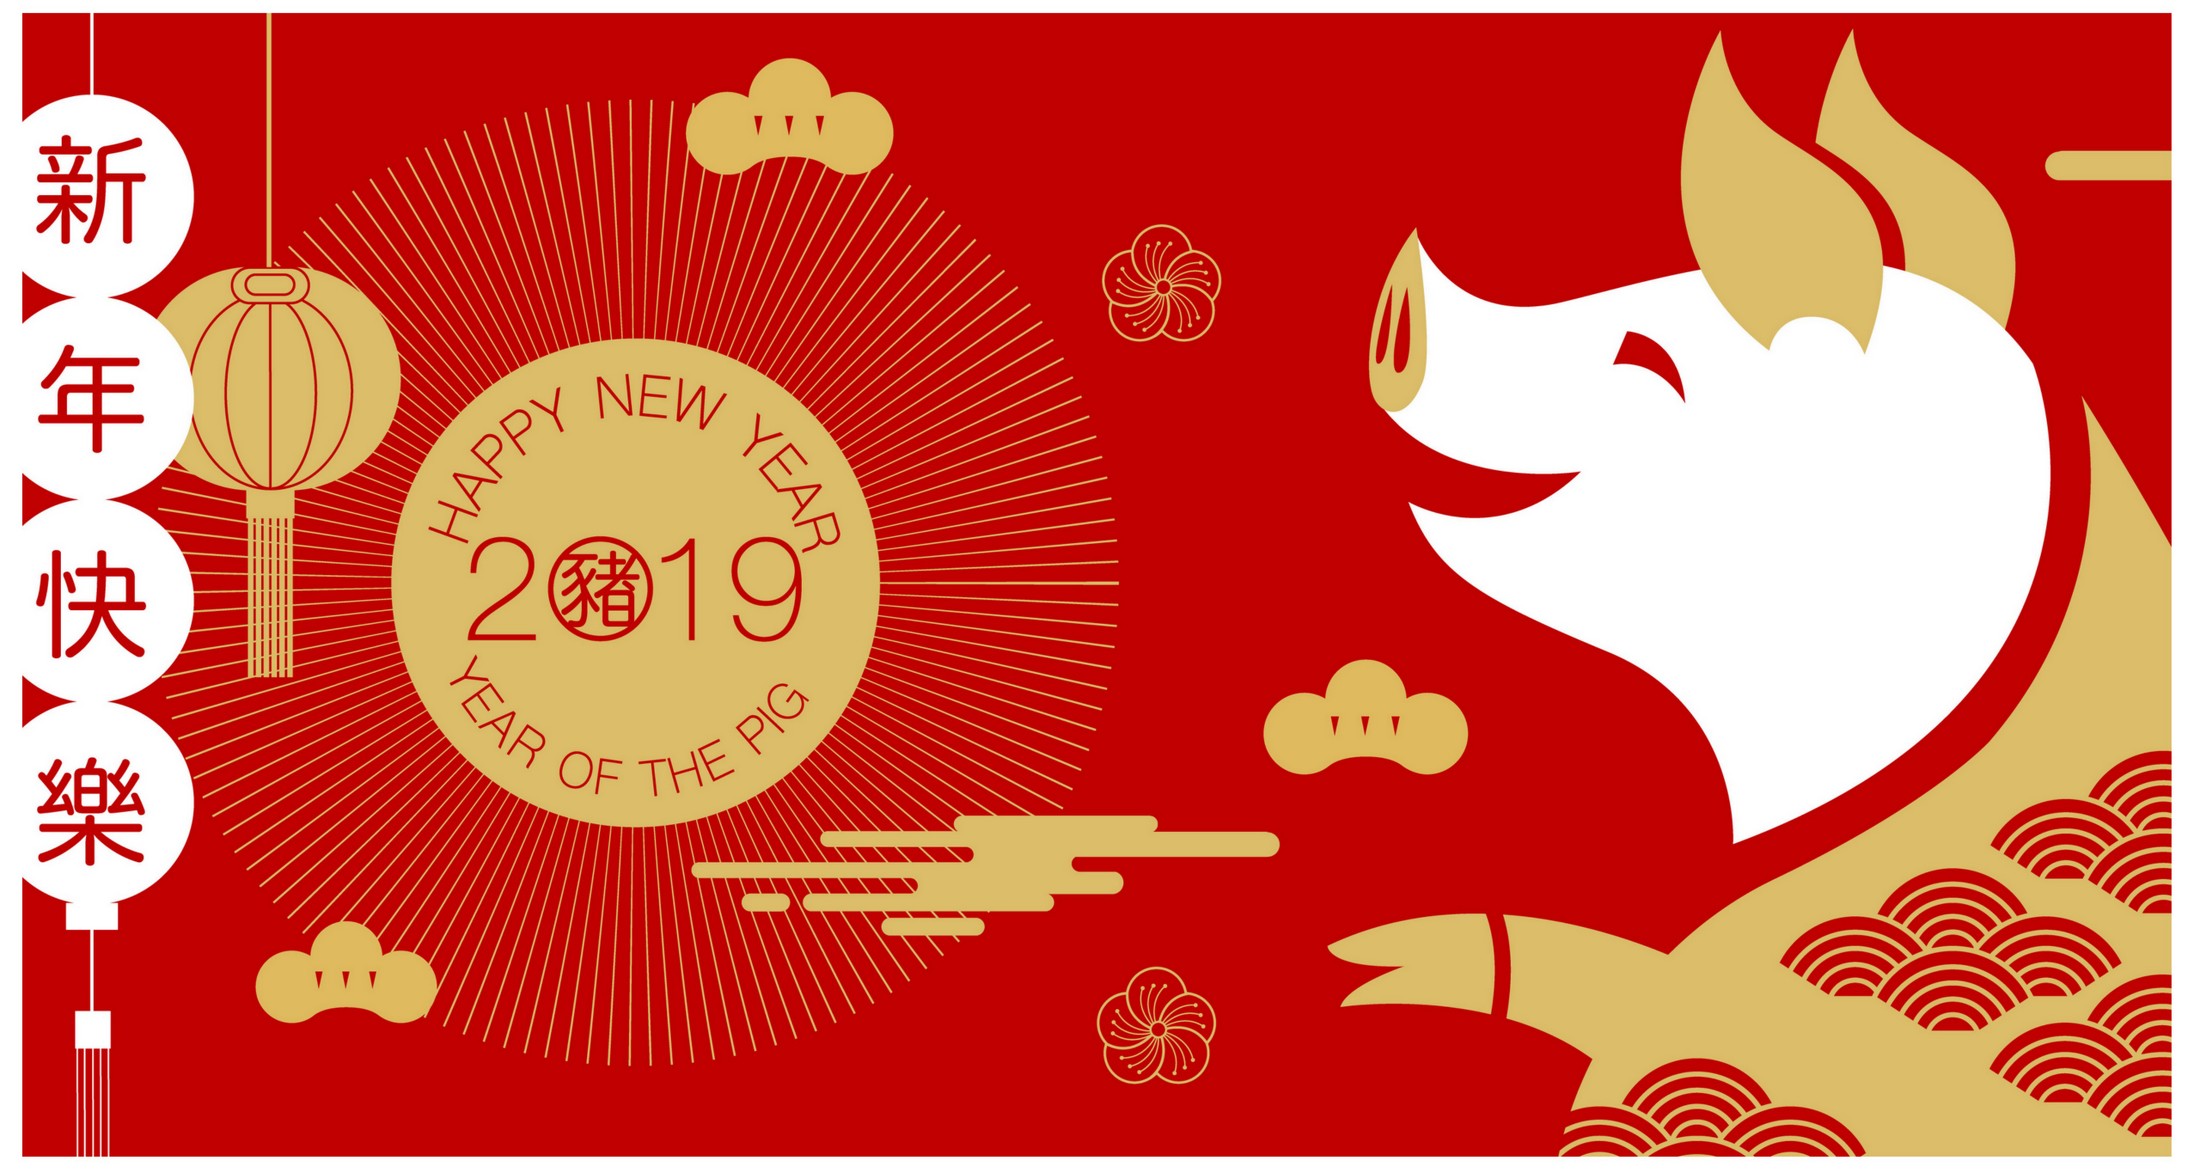 Beauty products to get in 2019: Chinese New Year and the Year of the Pig